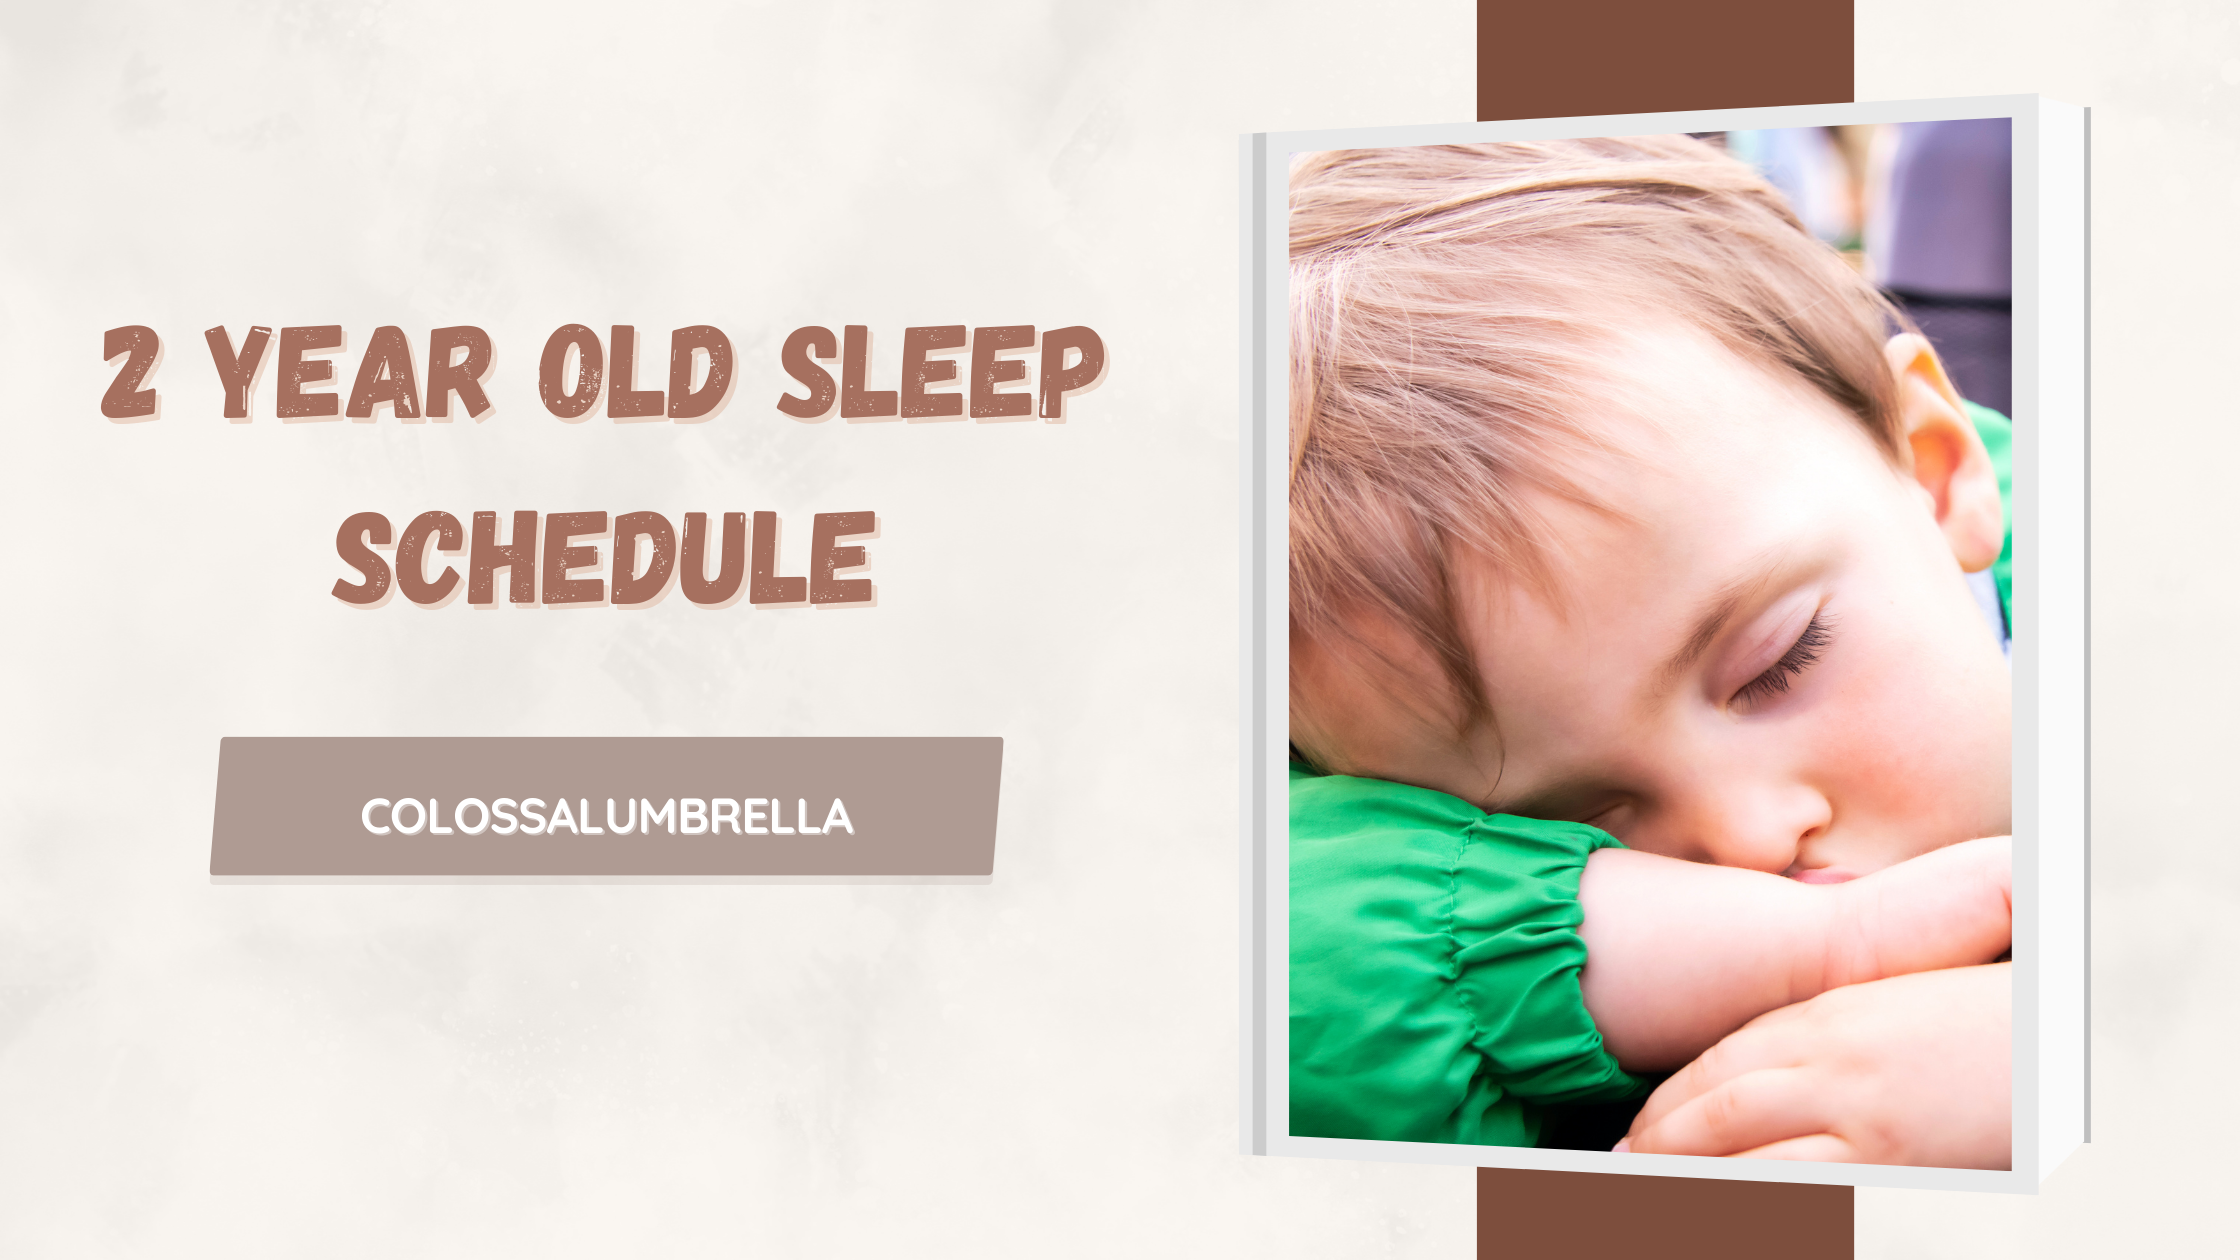 Creating a Successful 2 year old sleep schedule